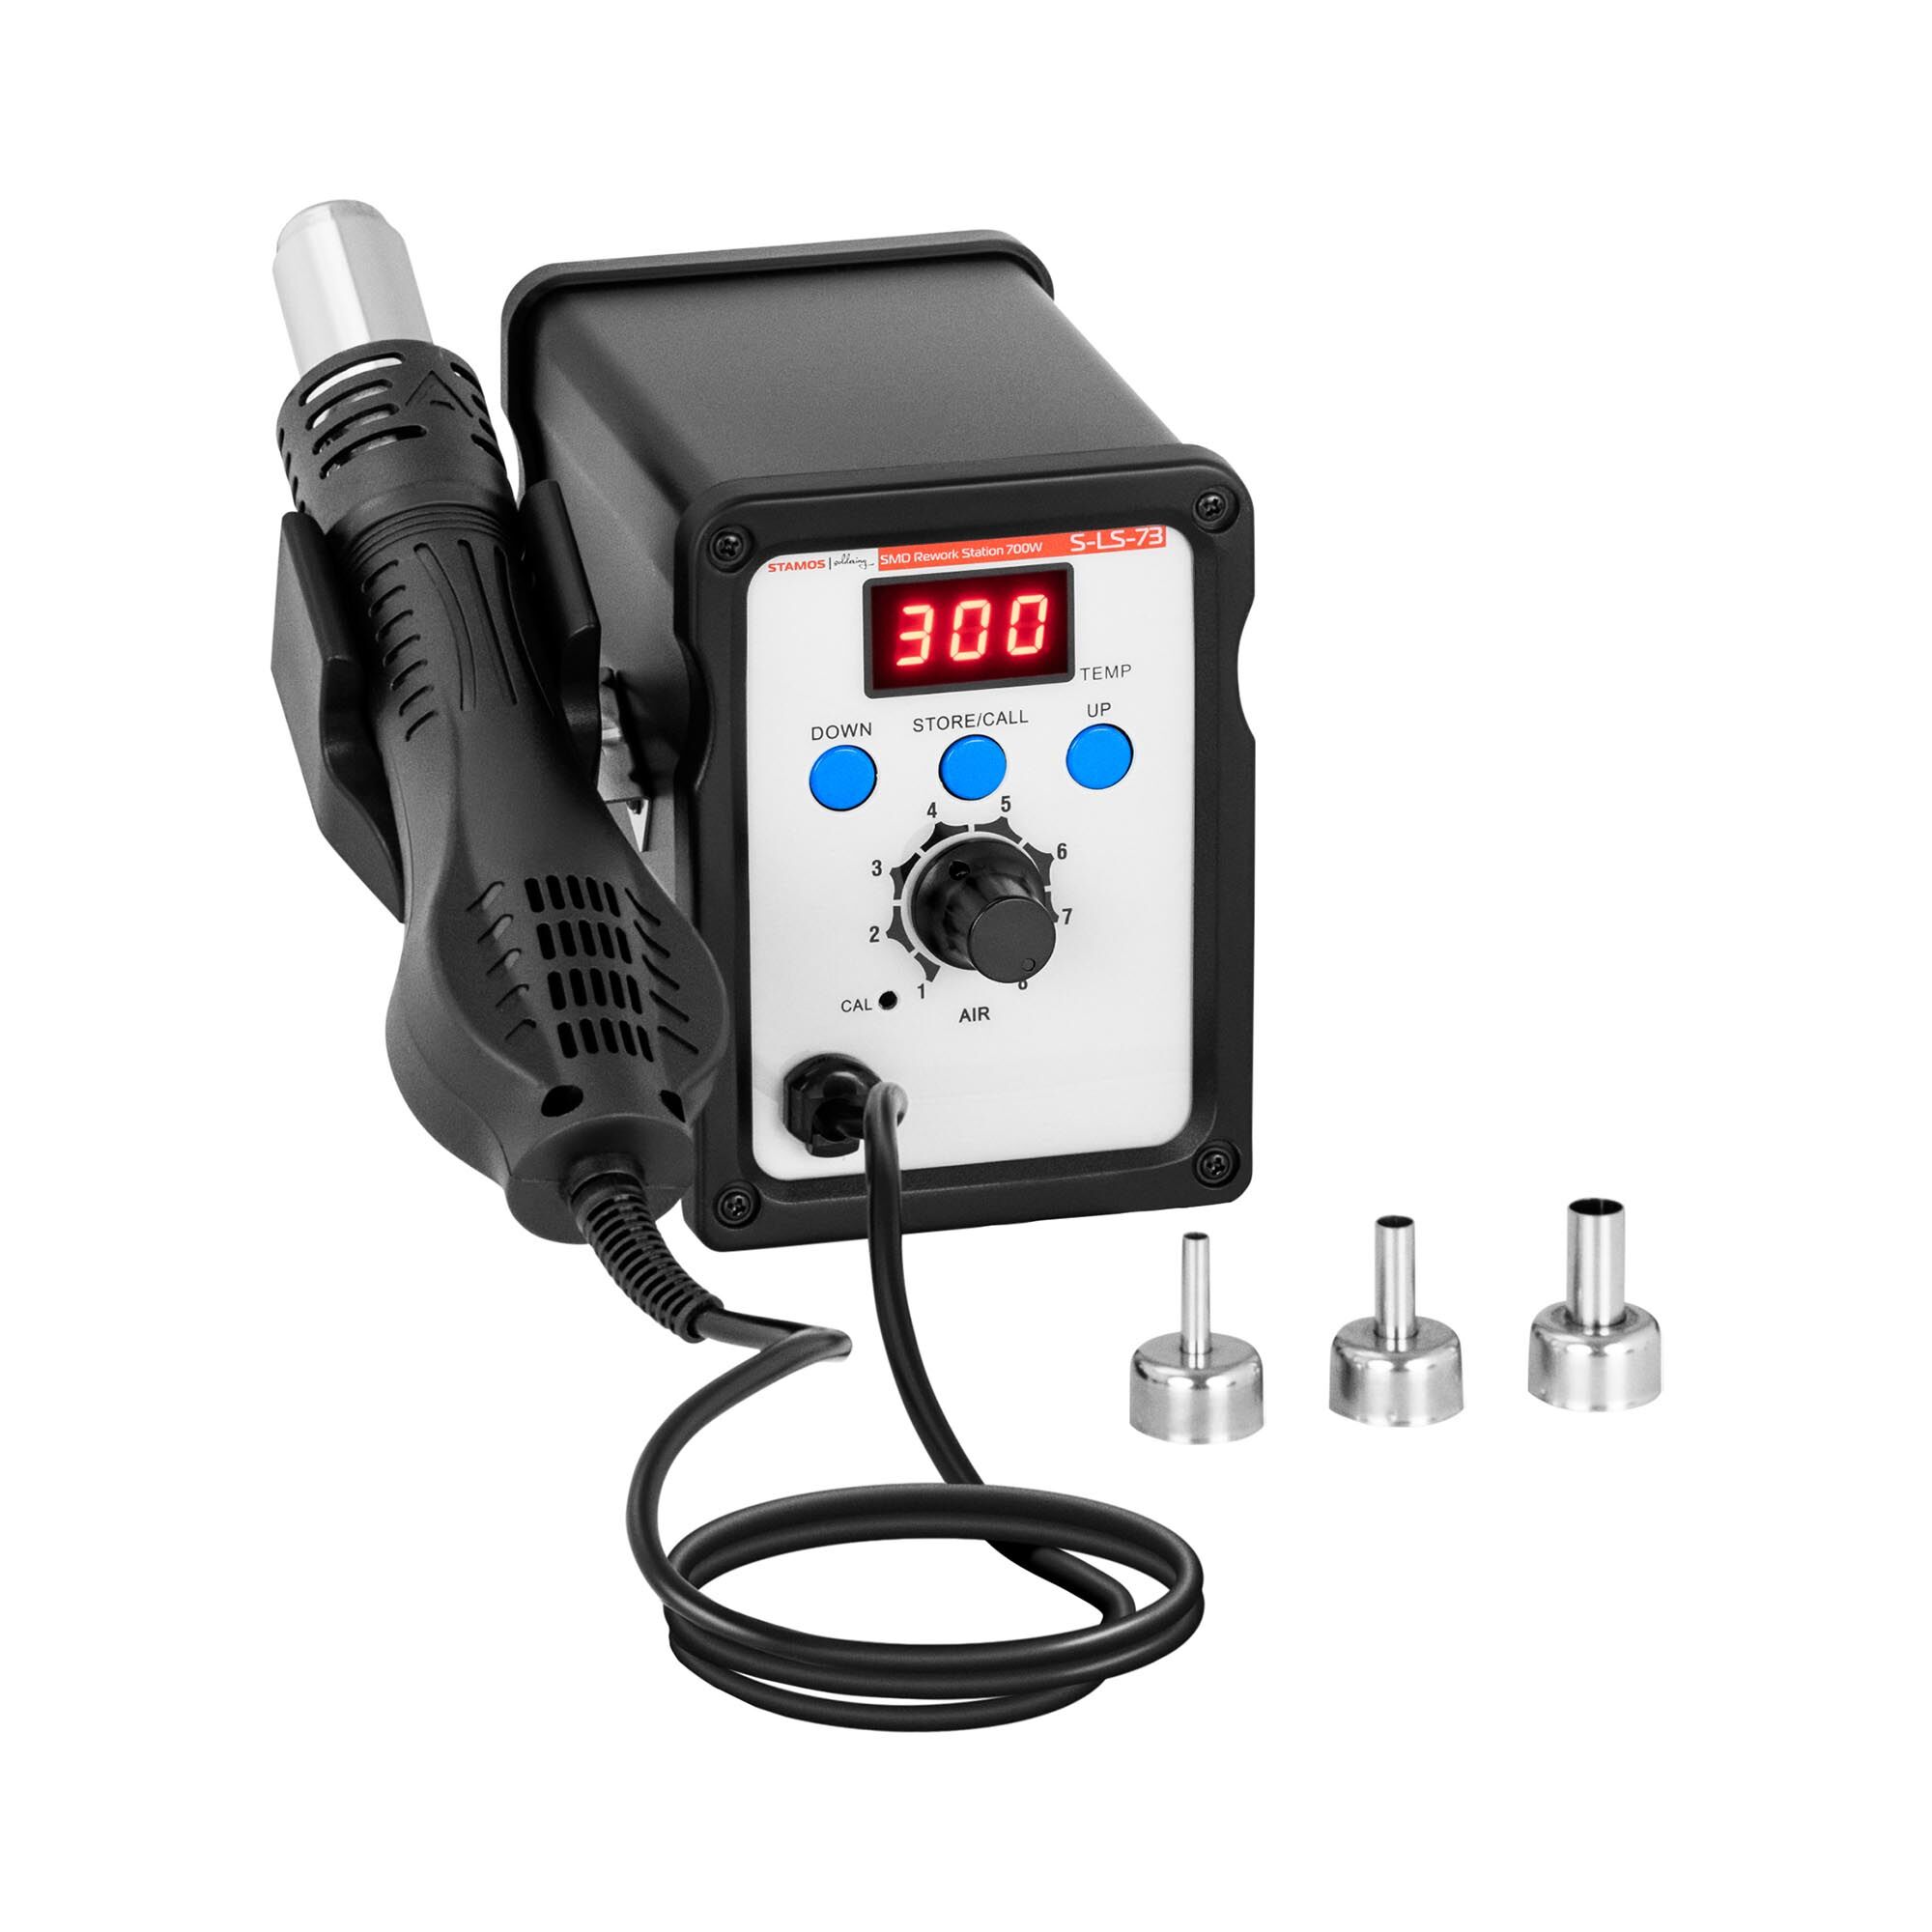 Stamos Soldering Soldering Station - with hot air gun - 700 W - LED display S-LS-73